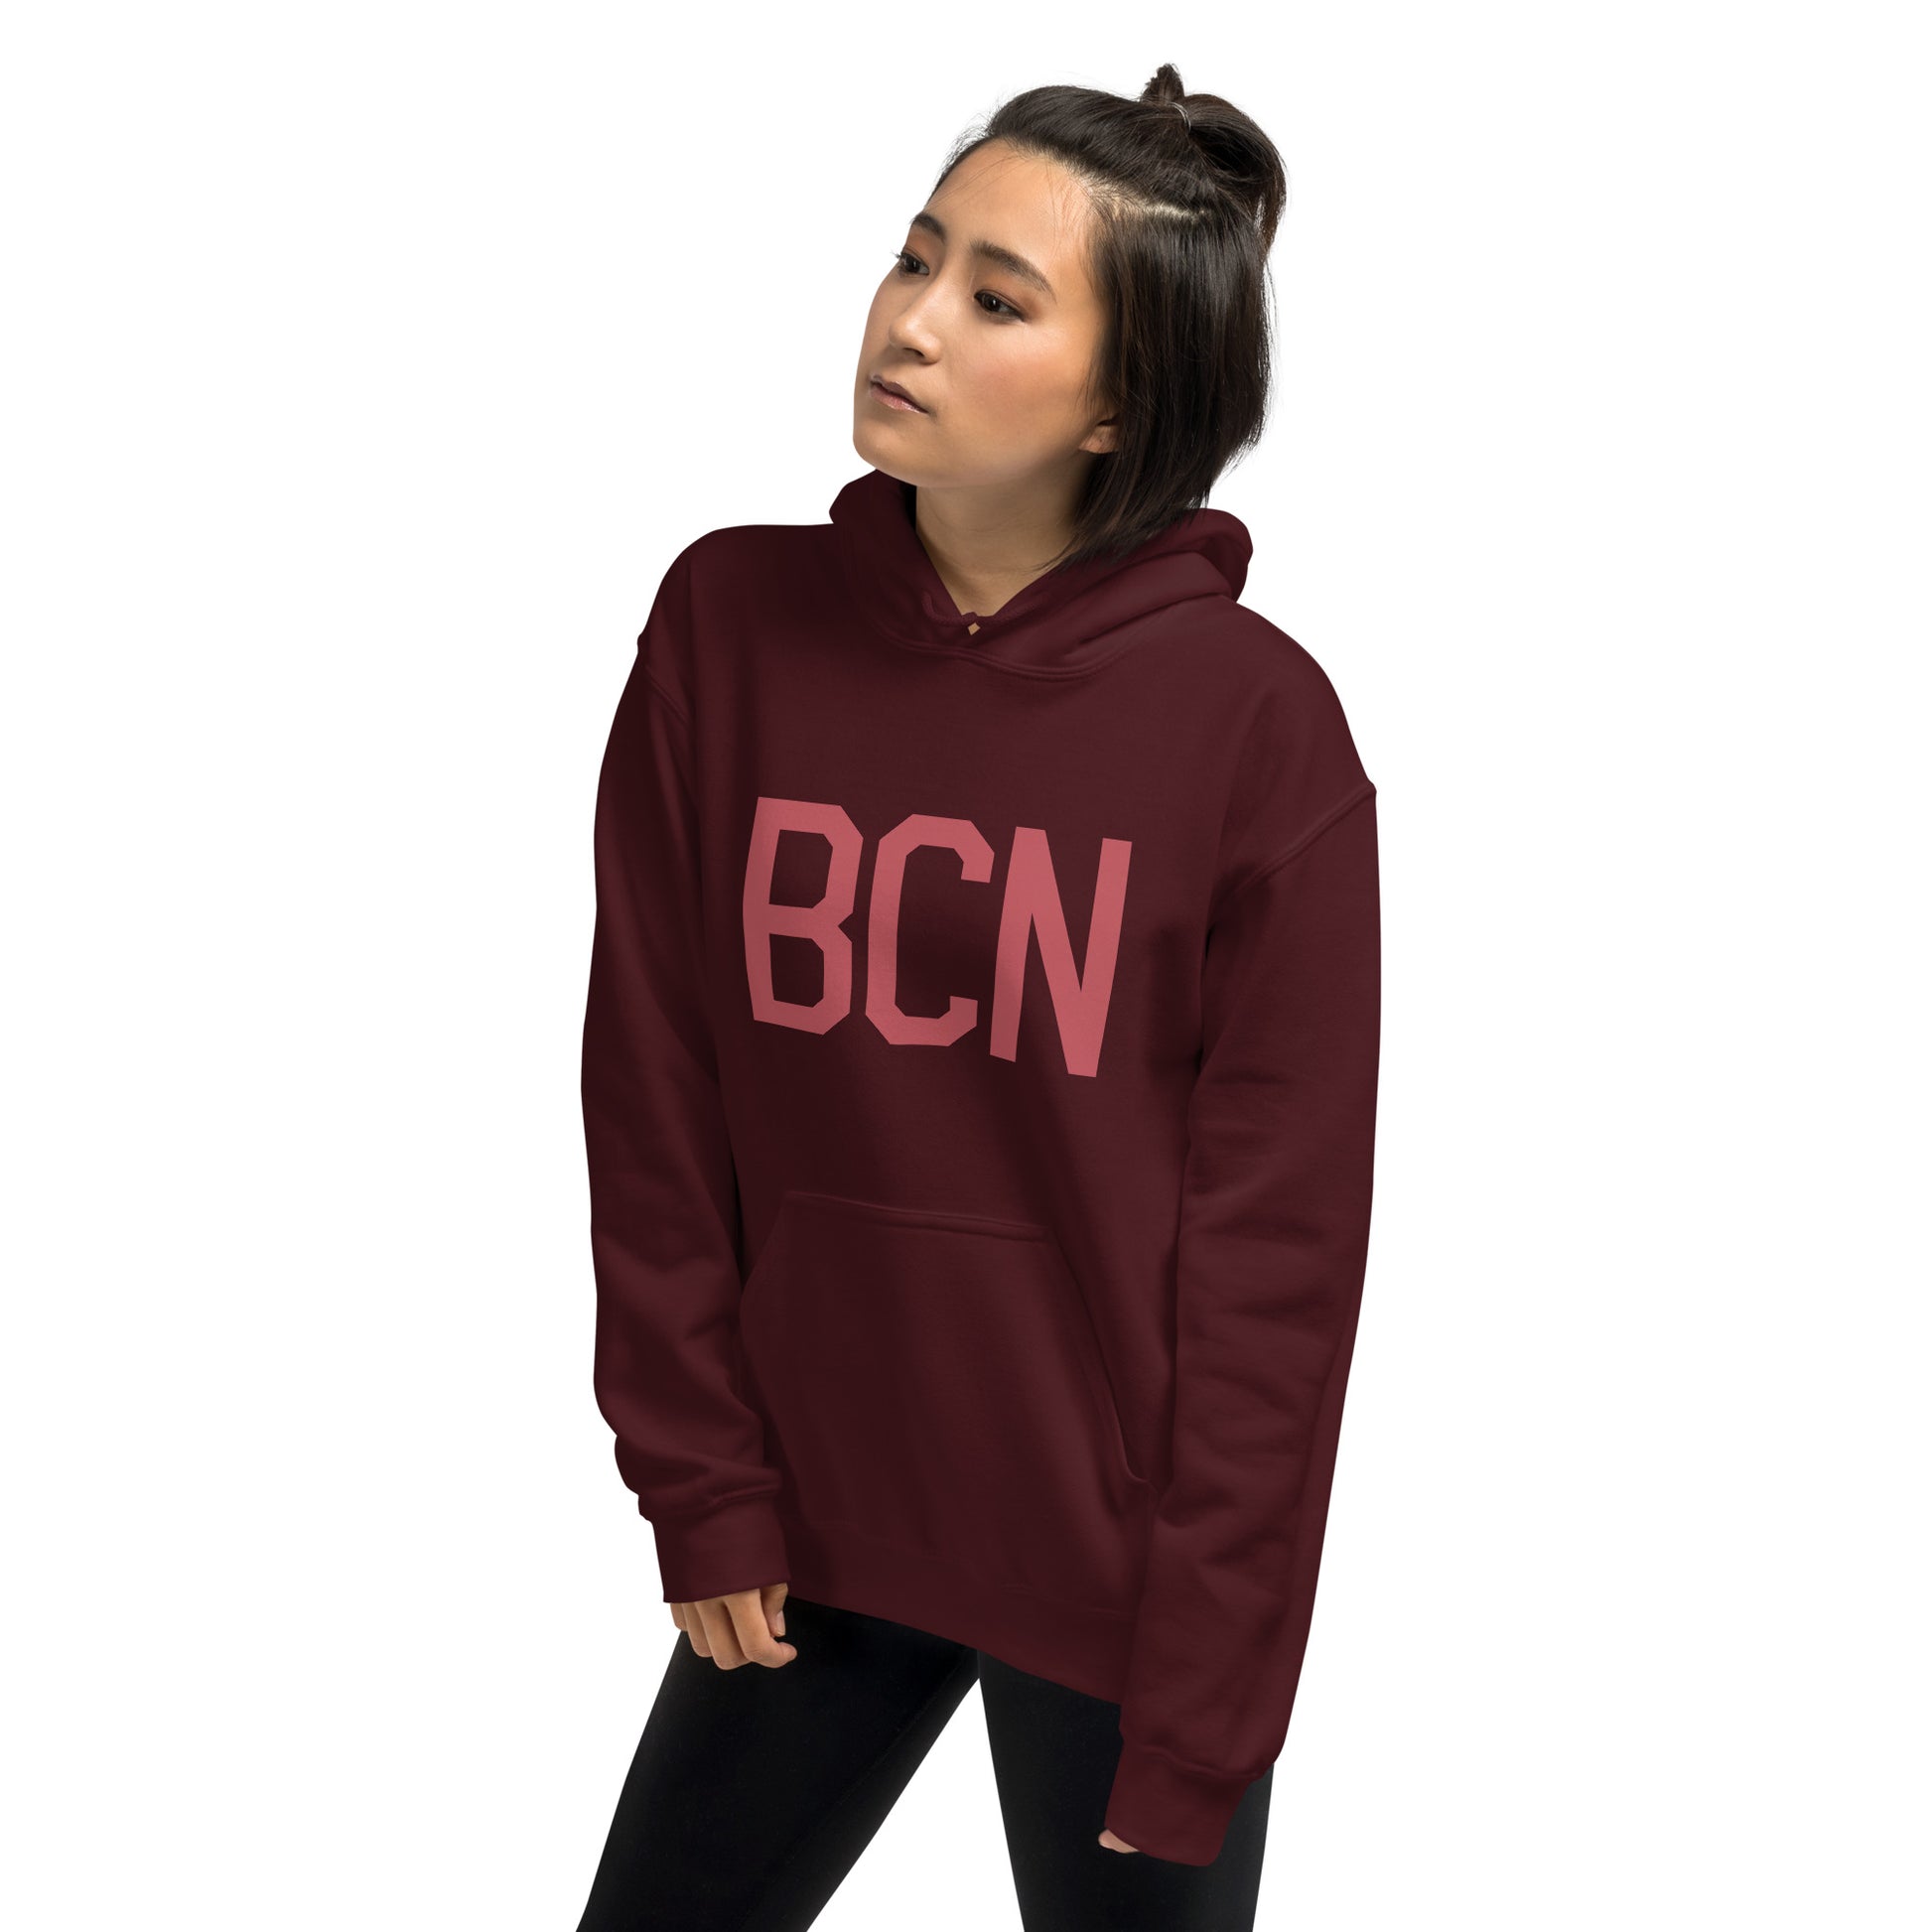 Aviation Enthusiast Hoodie - Deep Pink Graphic • BCN Barcelona • YHM Designs - Image 10